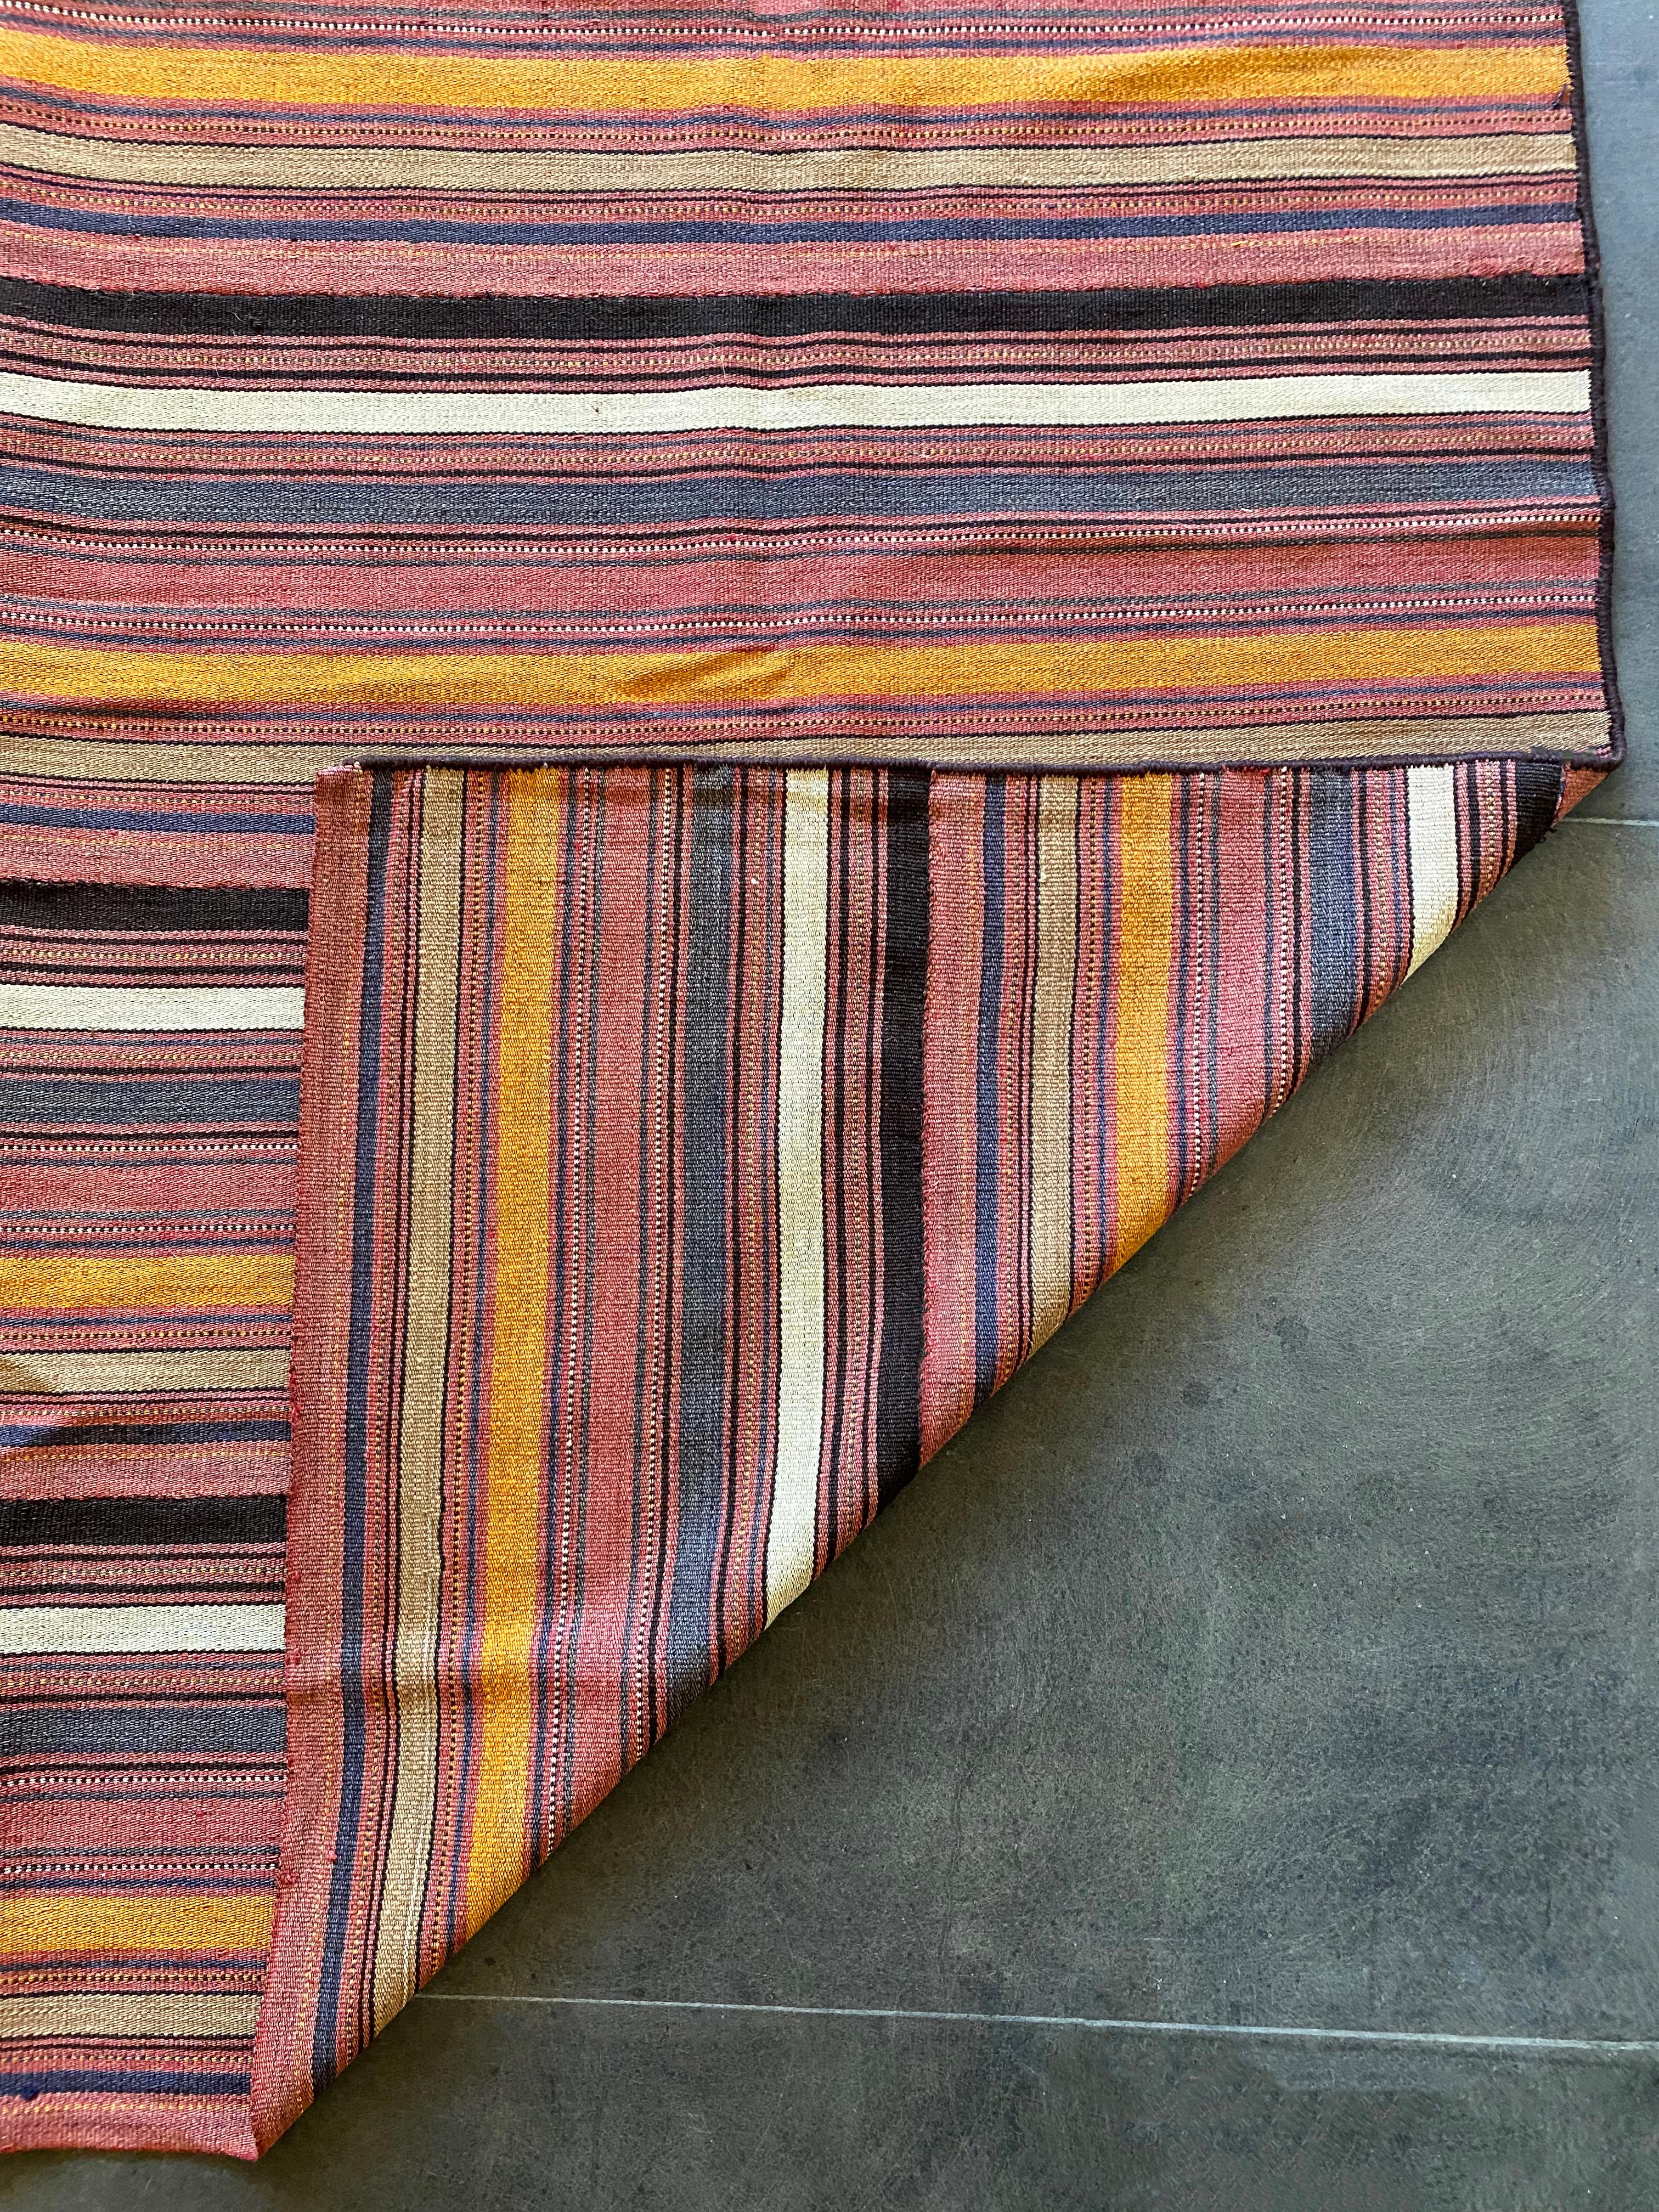 Striped, Multicoloured Turkish Wool Kilim Rug, Early 20th Century For Sale 6